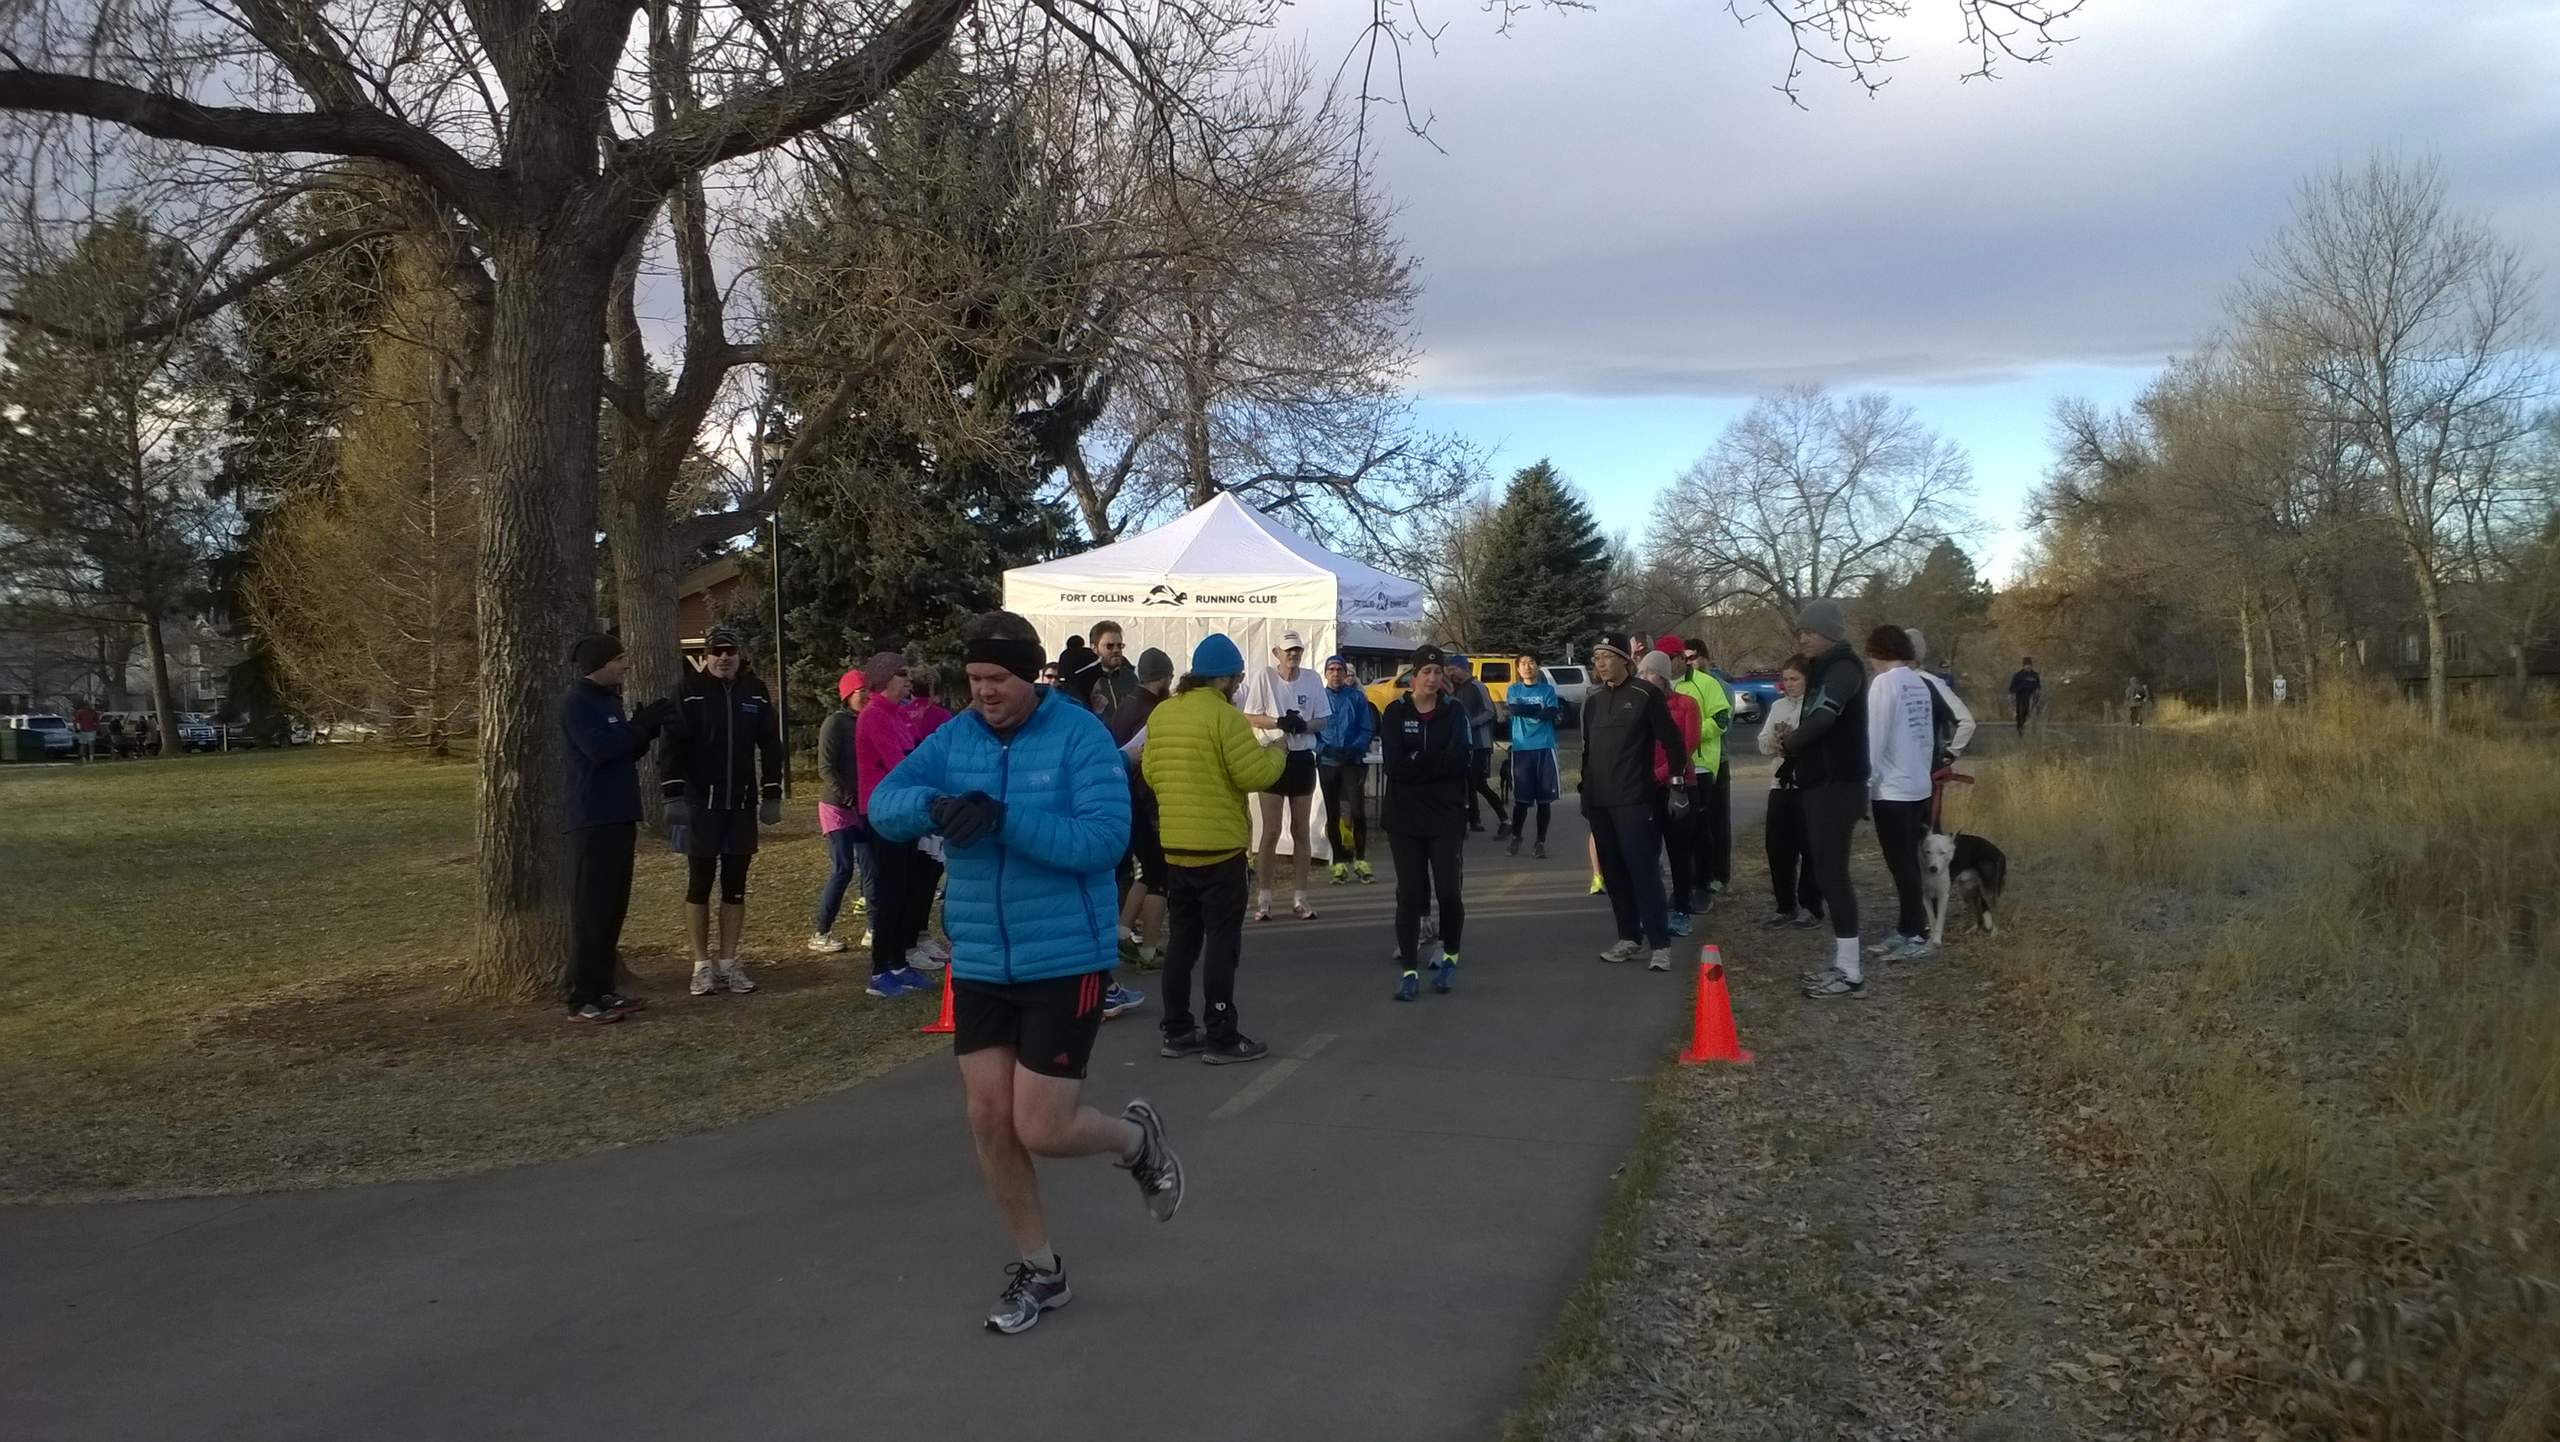 A runner taking off from the start line of the Spring Park 6k.